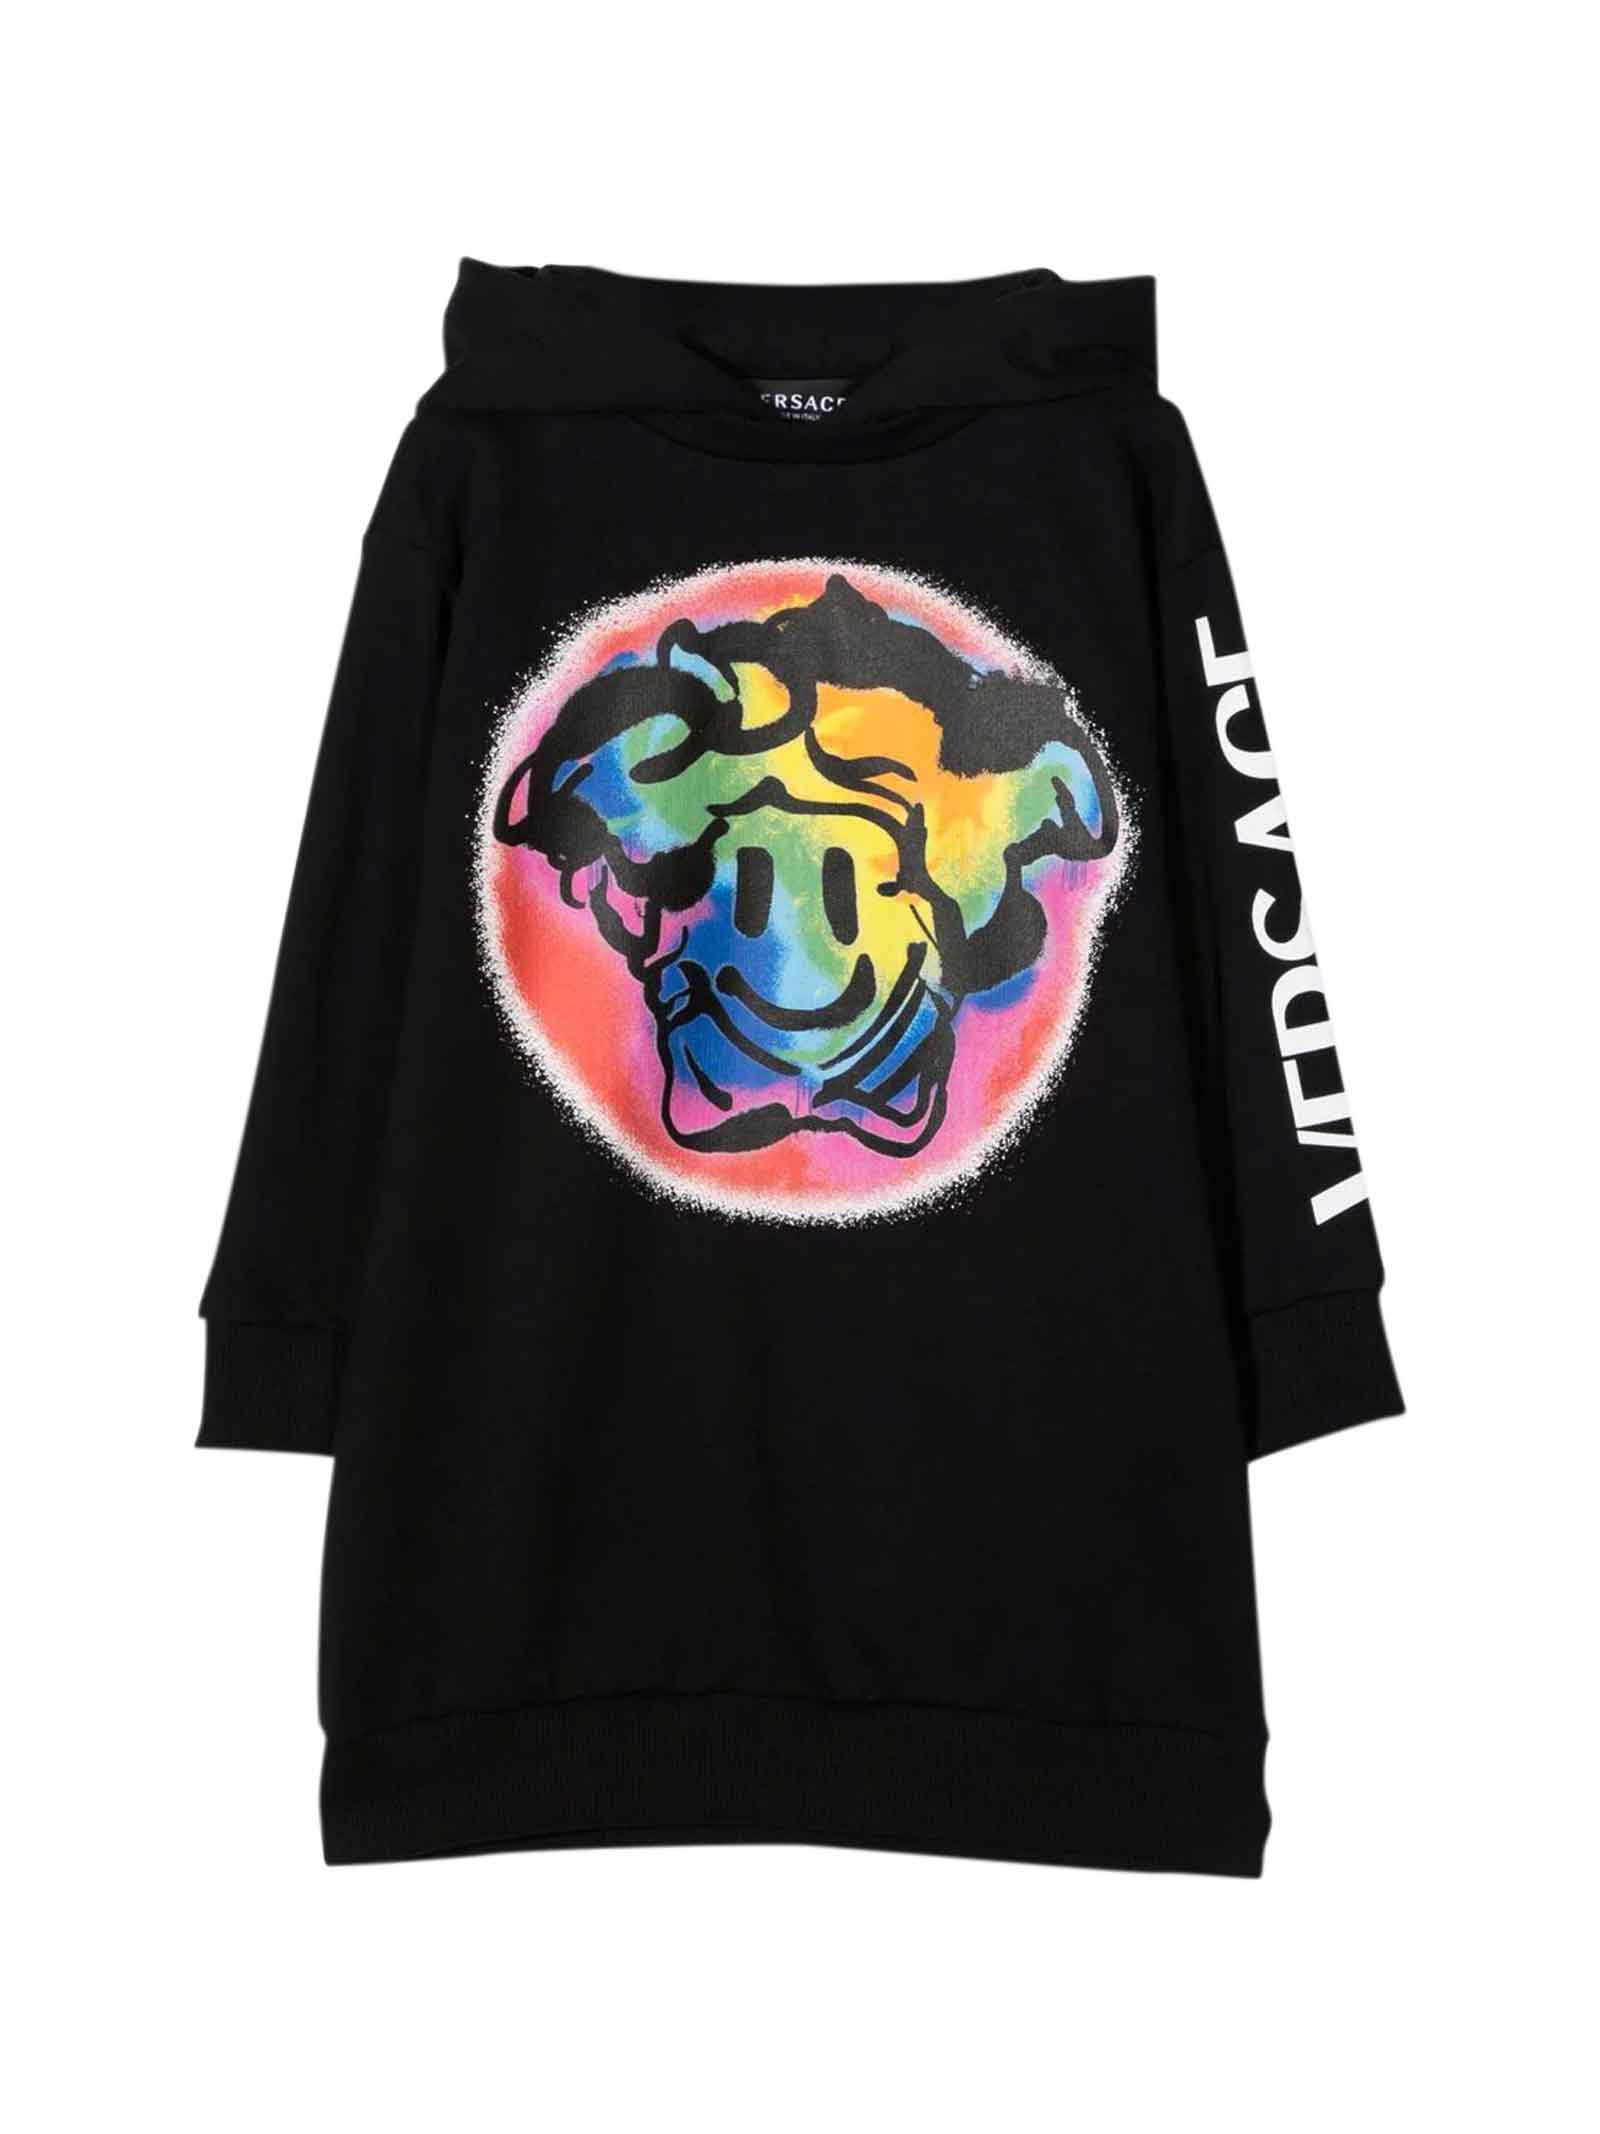 Versace Black Dress With Multicolor Print And Hood Kids